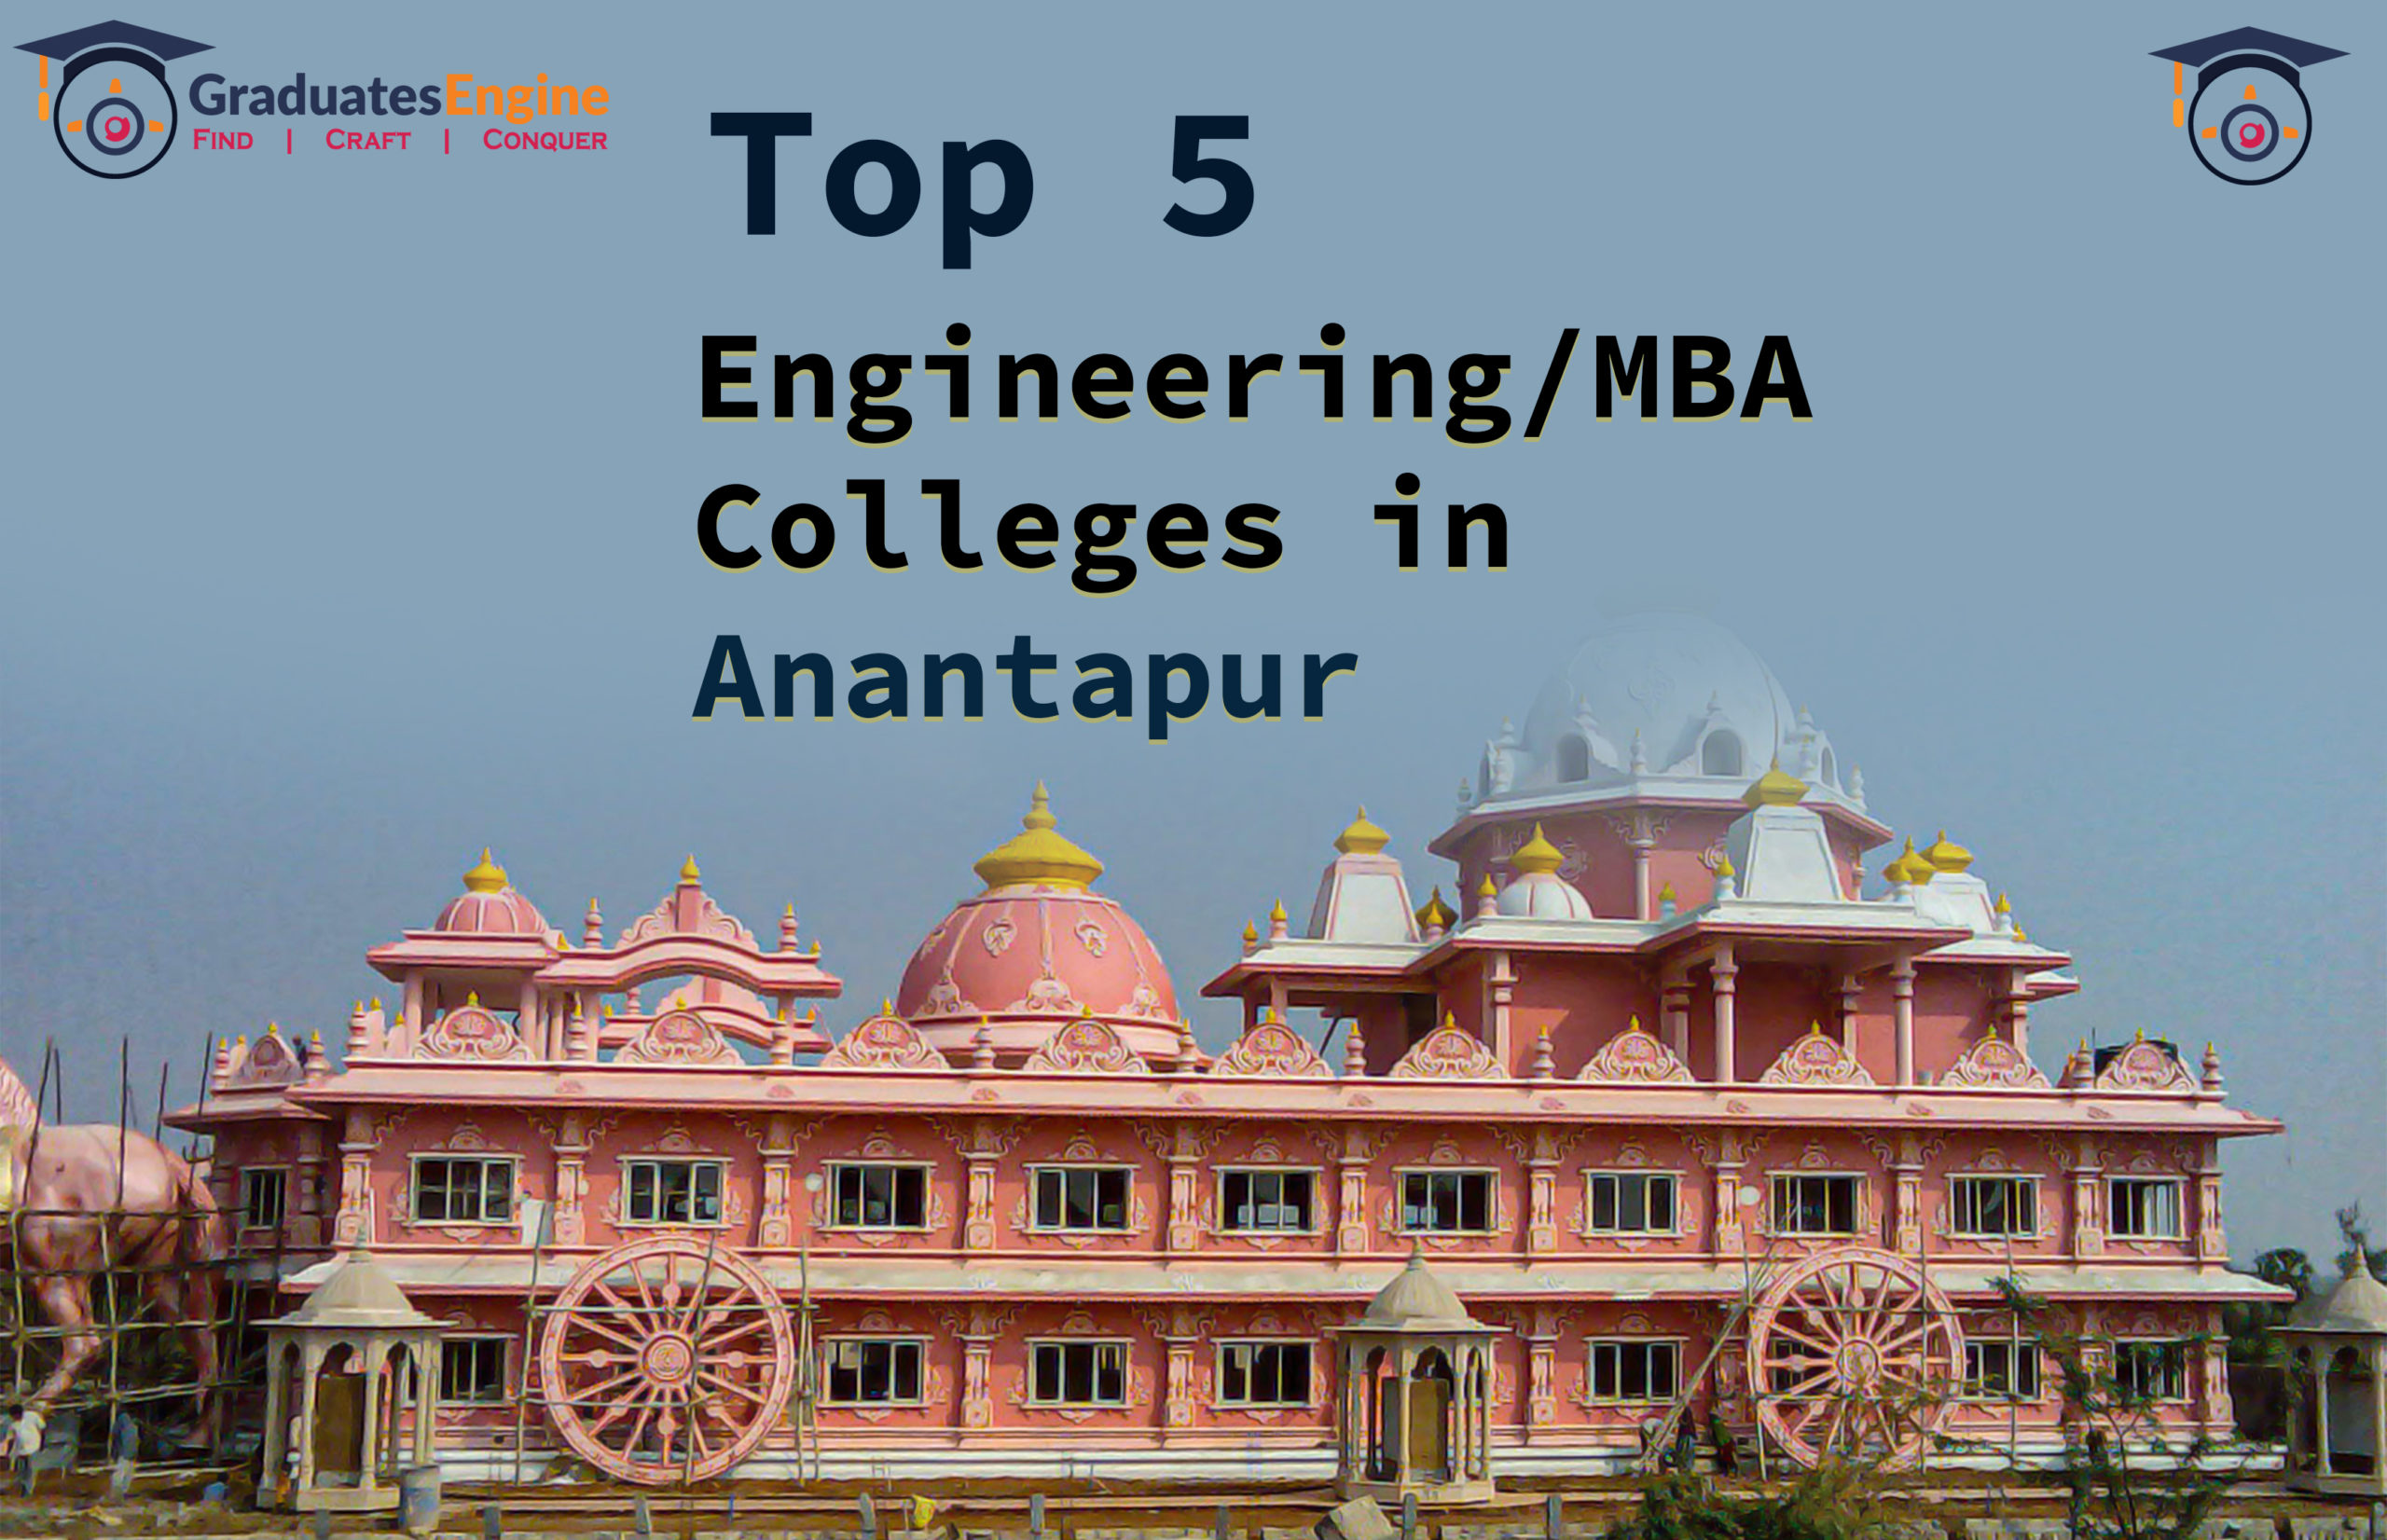 Top 5 Engineering/MBA colleges in Anantapur